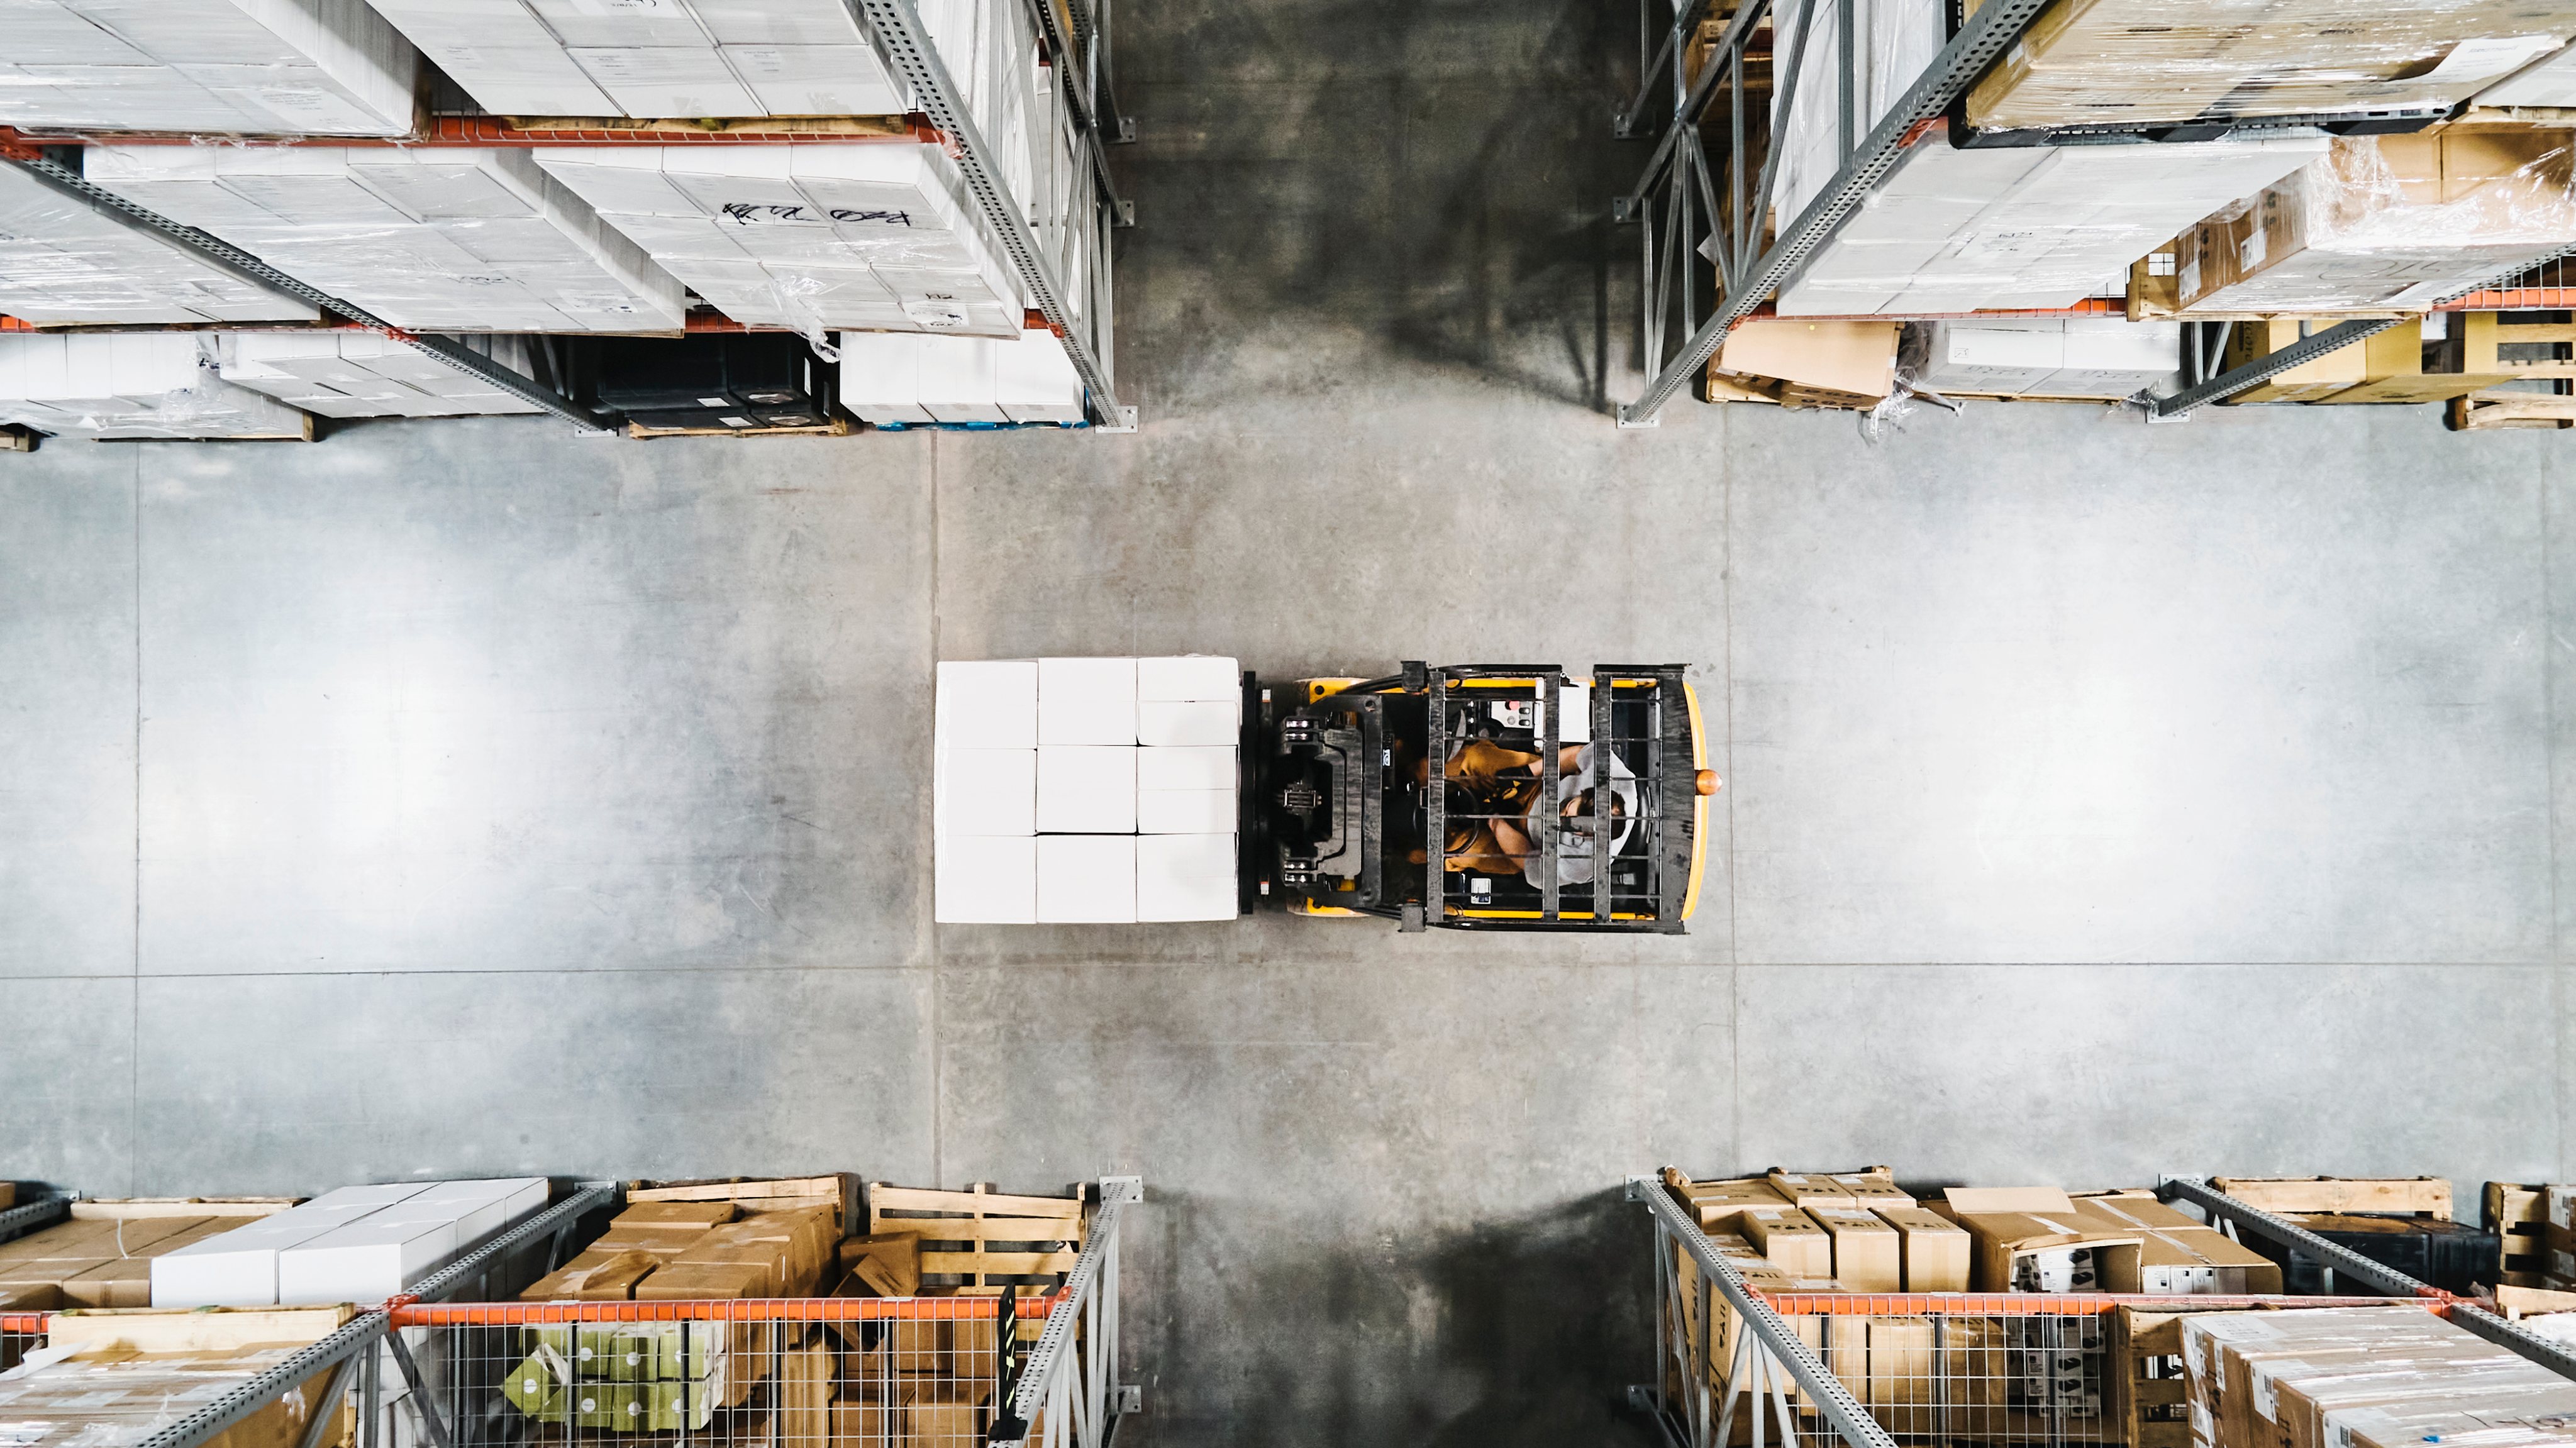 Overhead view of warehouse worker moving pallet of goods with forklift in warehouse